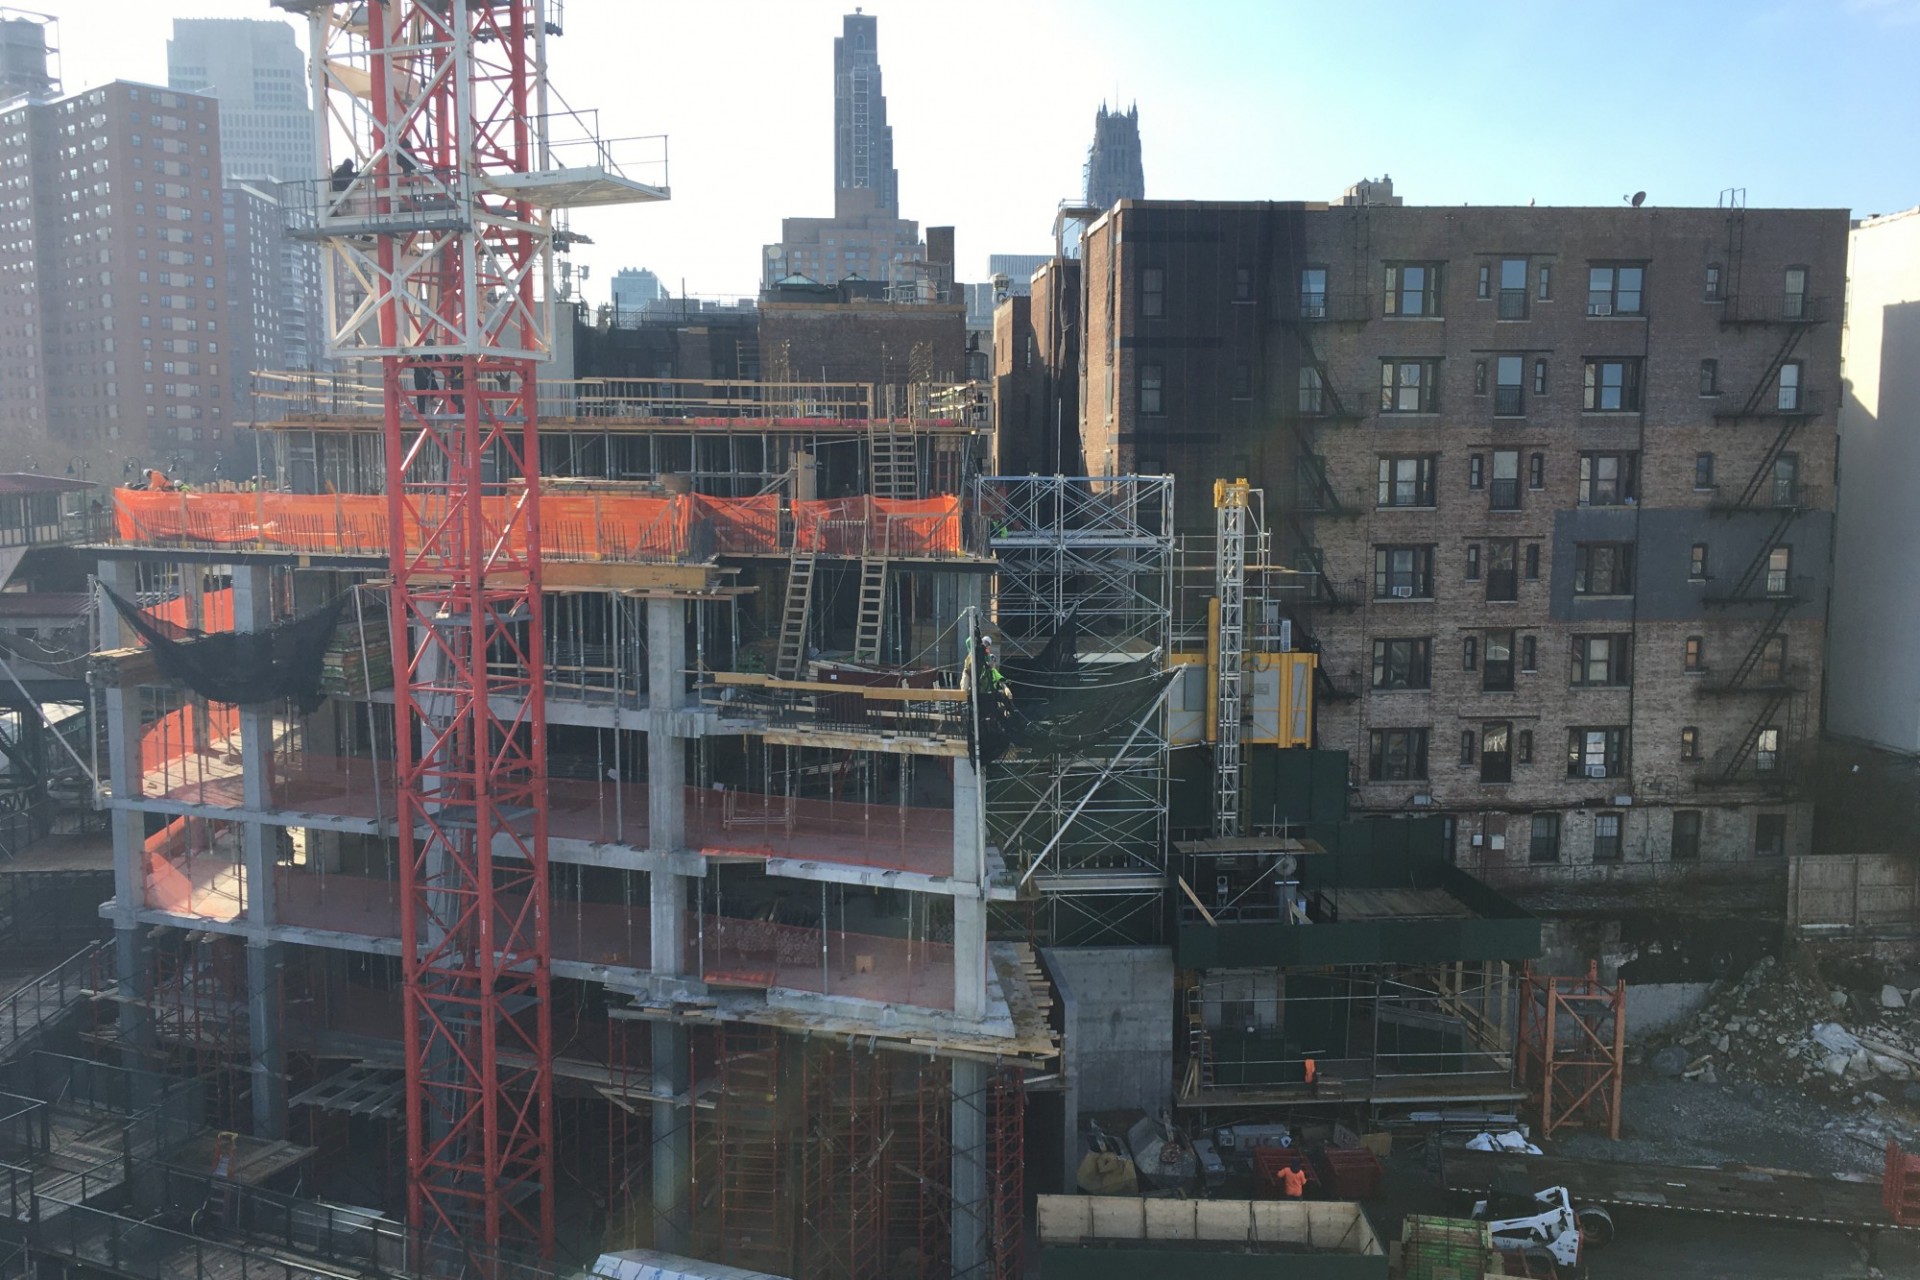 An aerial view of the 600 W. 125th Street construction site from the 125th Street subway.  